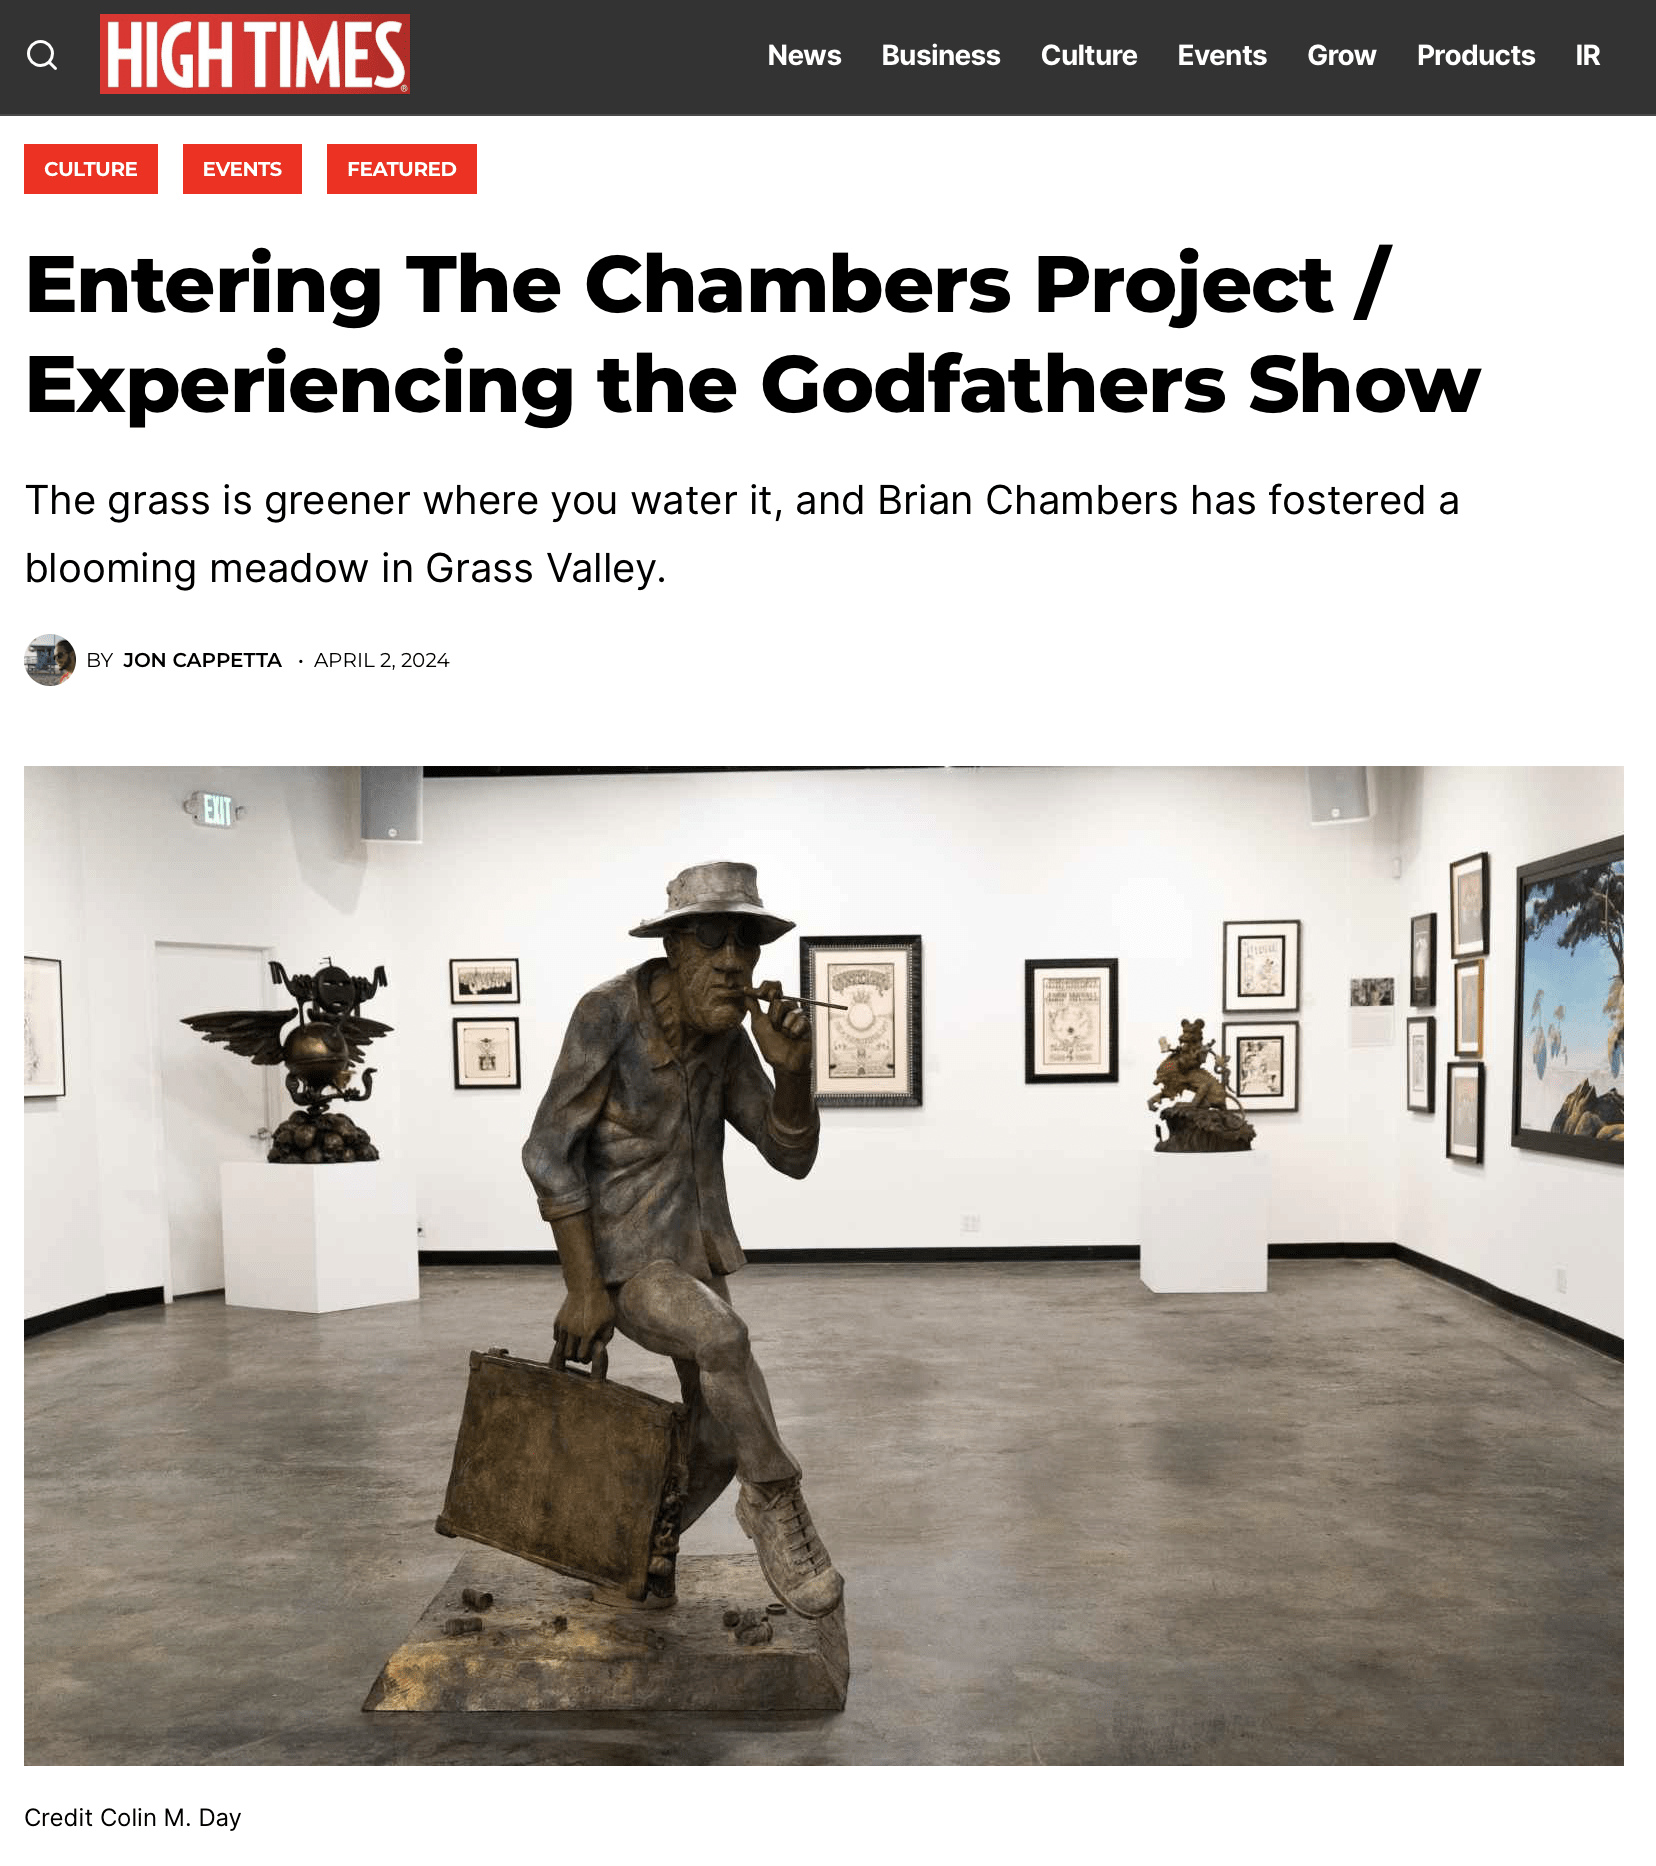 Entering The Chambers Project / Experiencing the Godfathers Show